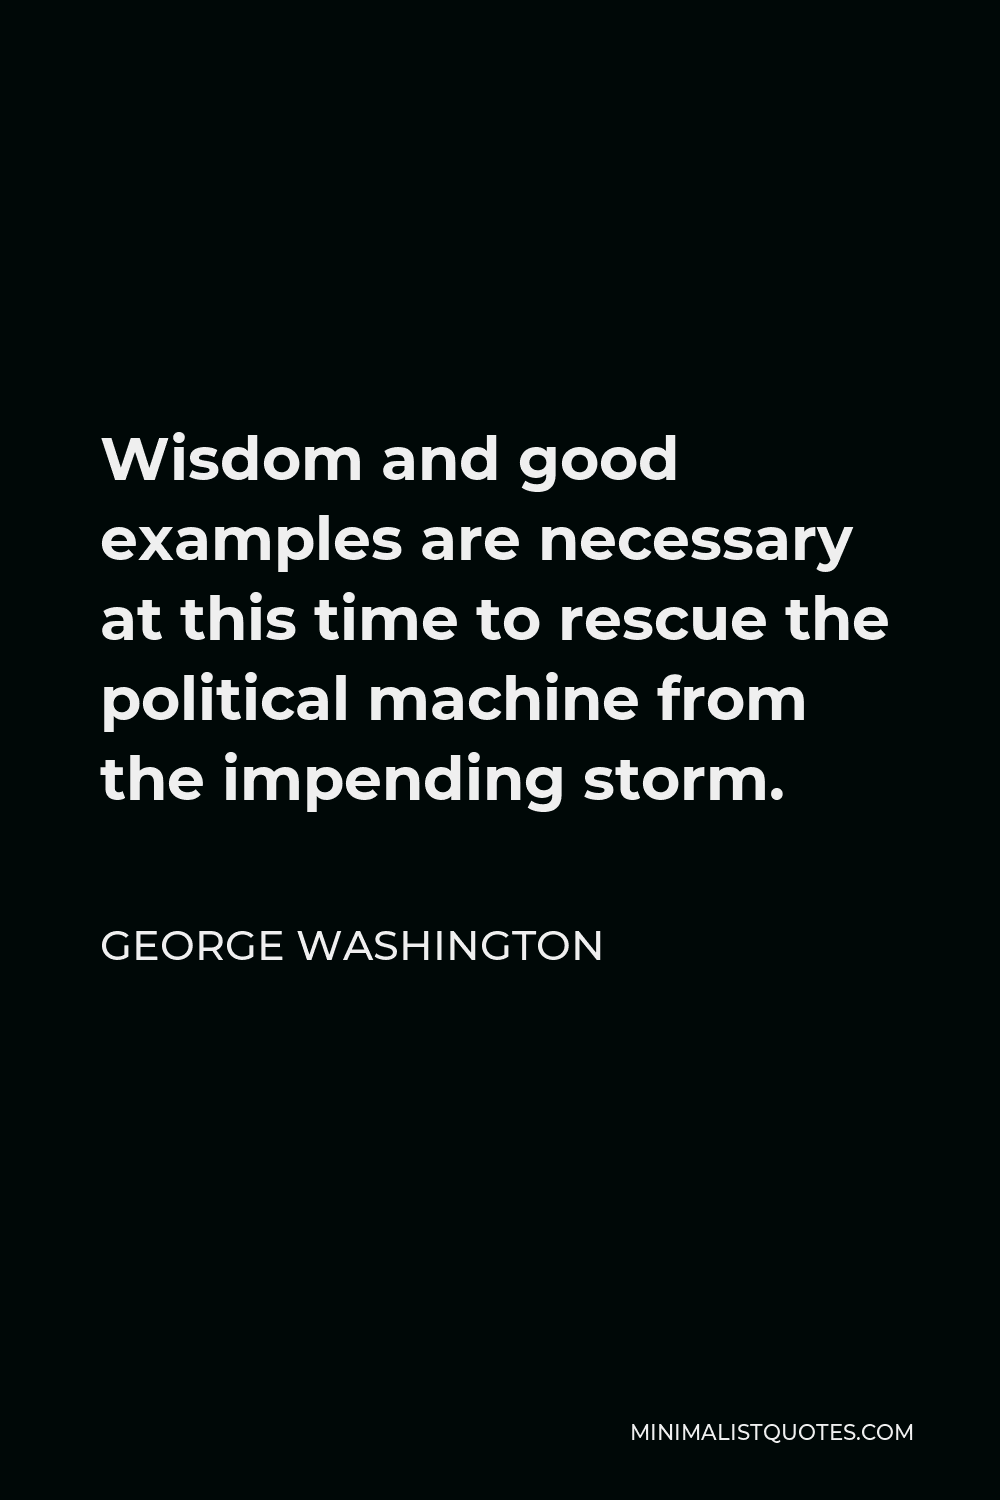 George Washington Quote - Wisdom and good examples are necessary at this time to rescue the political machine from the impending storm.